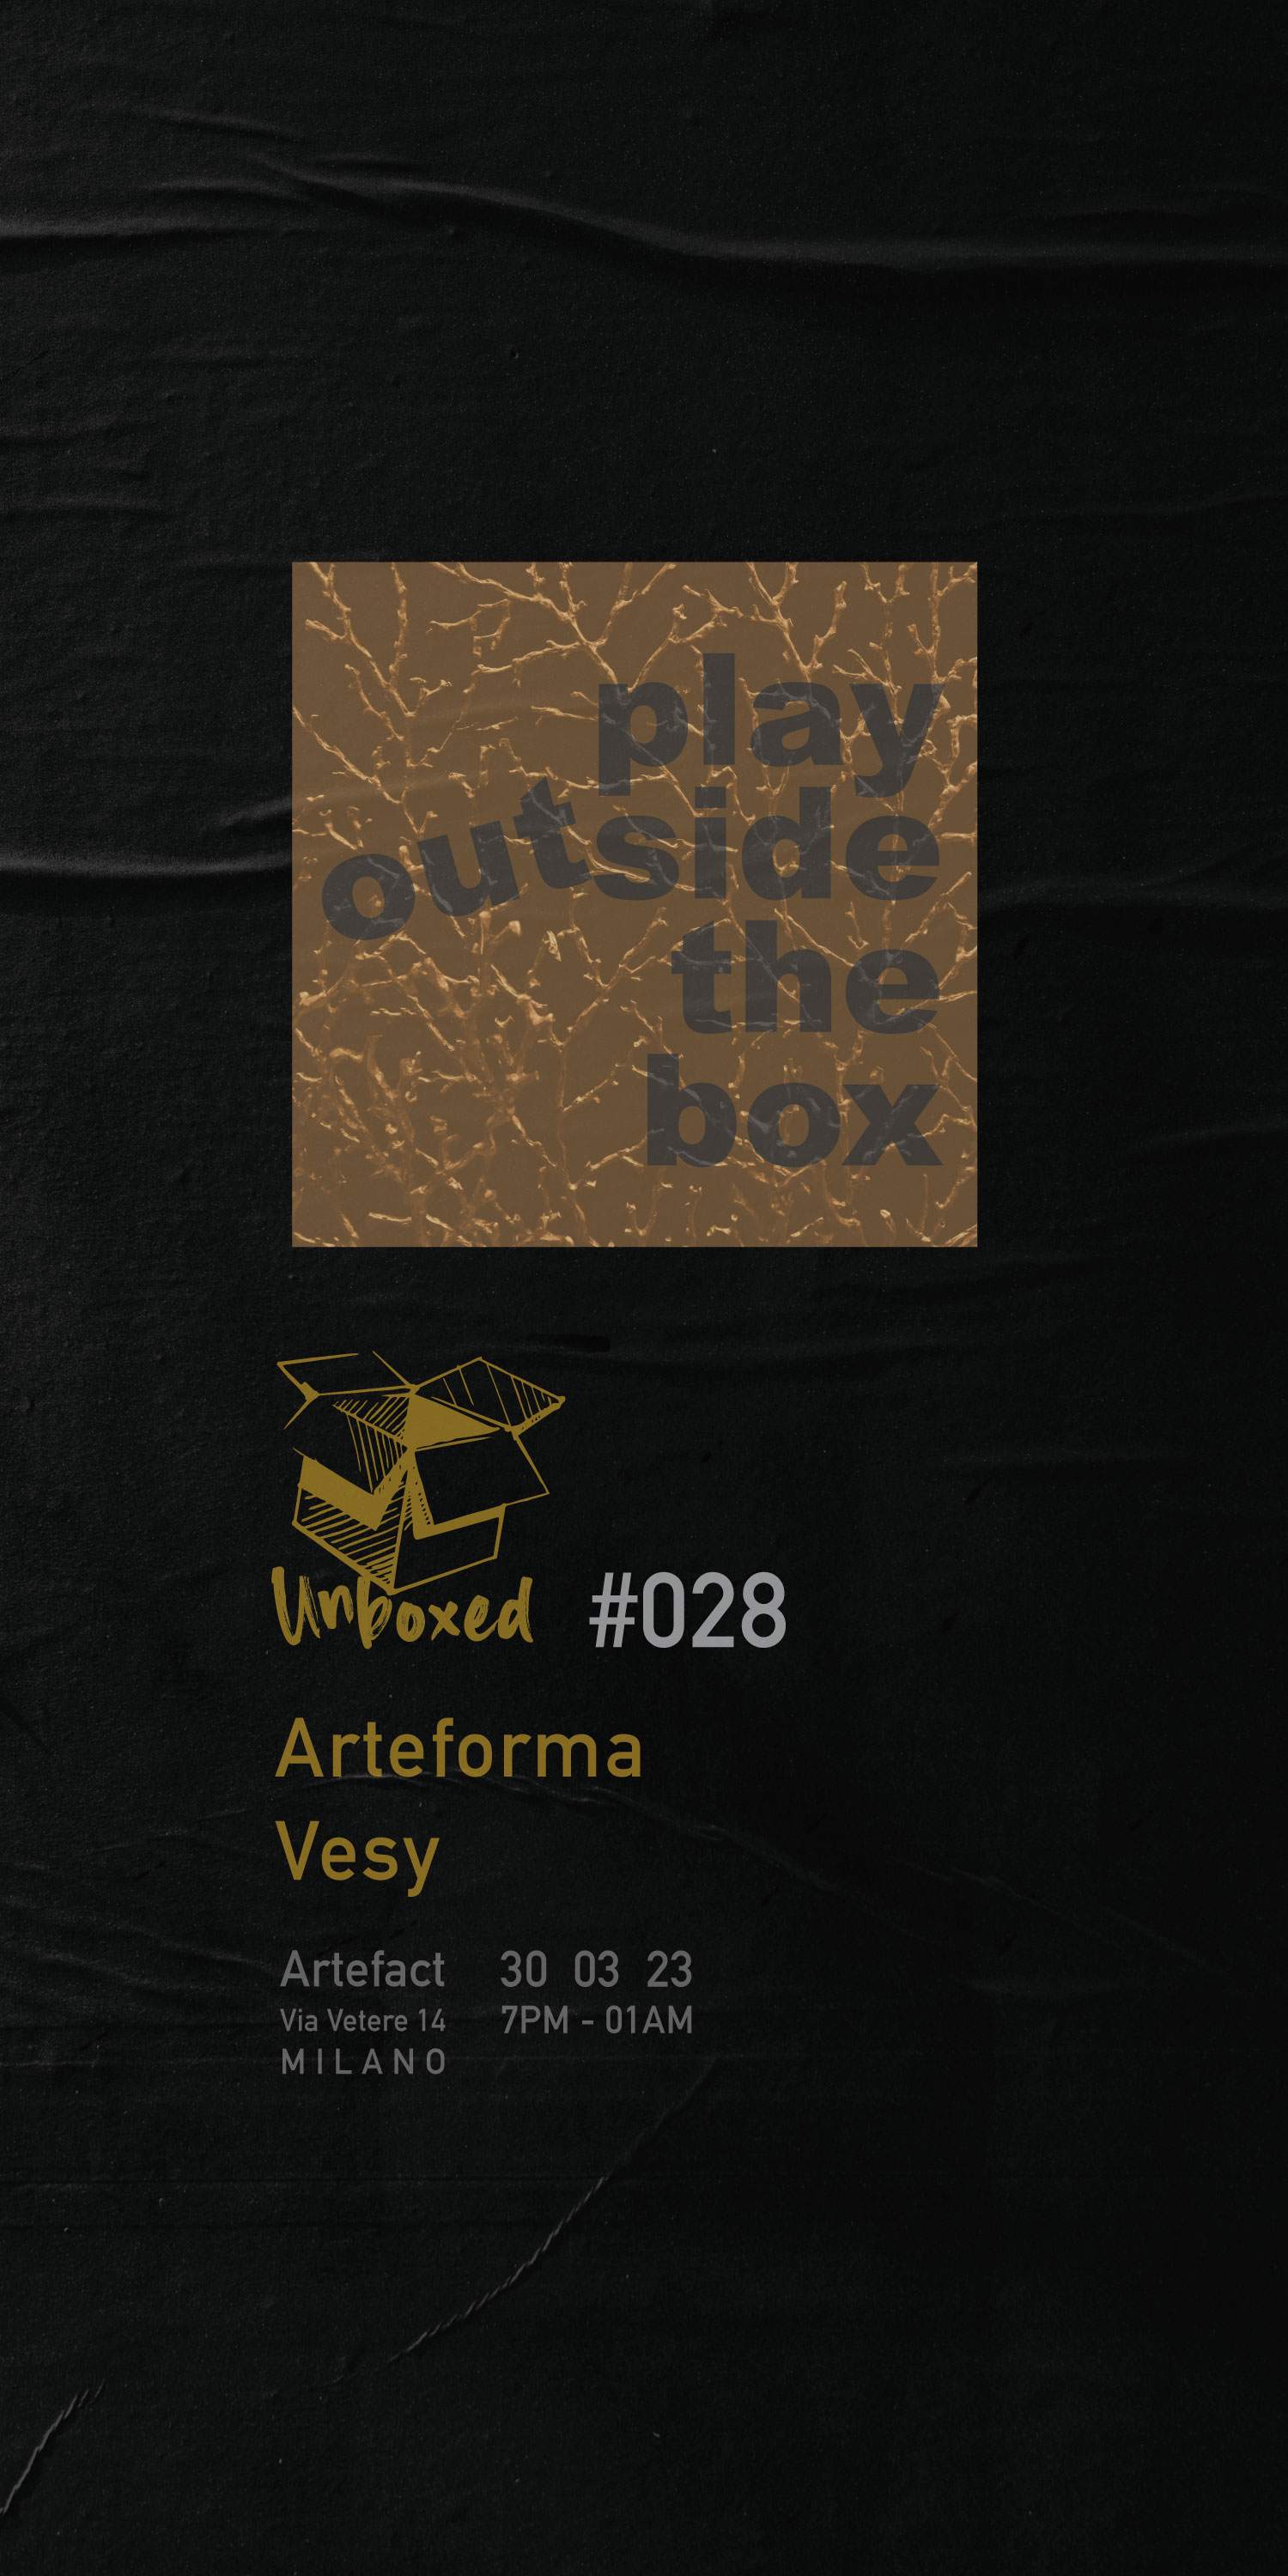 Unboxed: play outside the box #028 - フライヤー裏